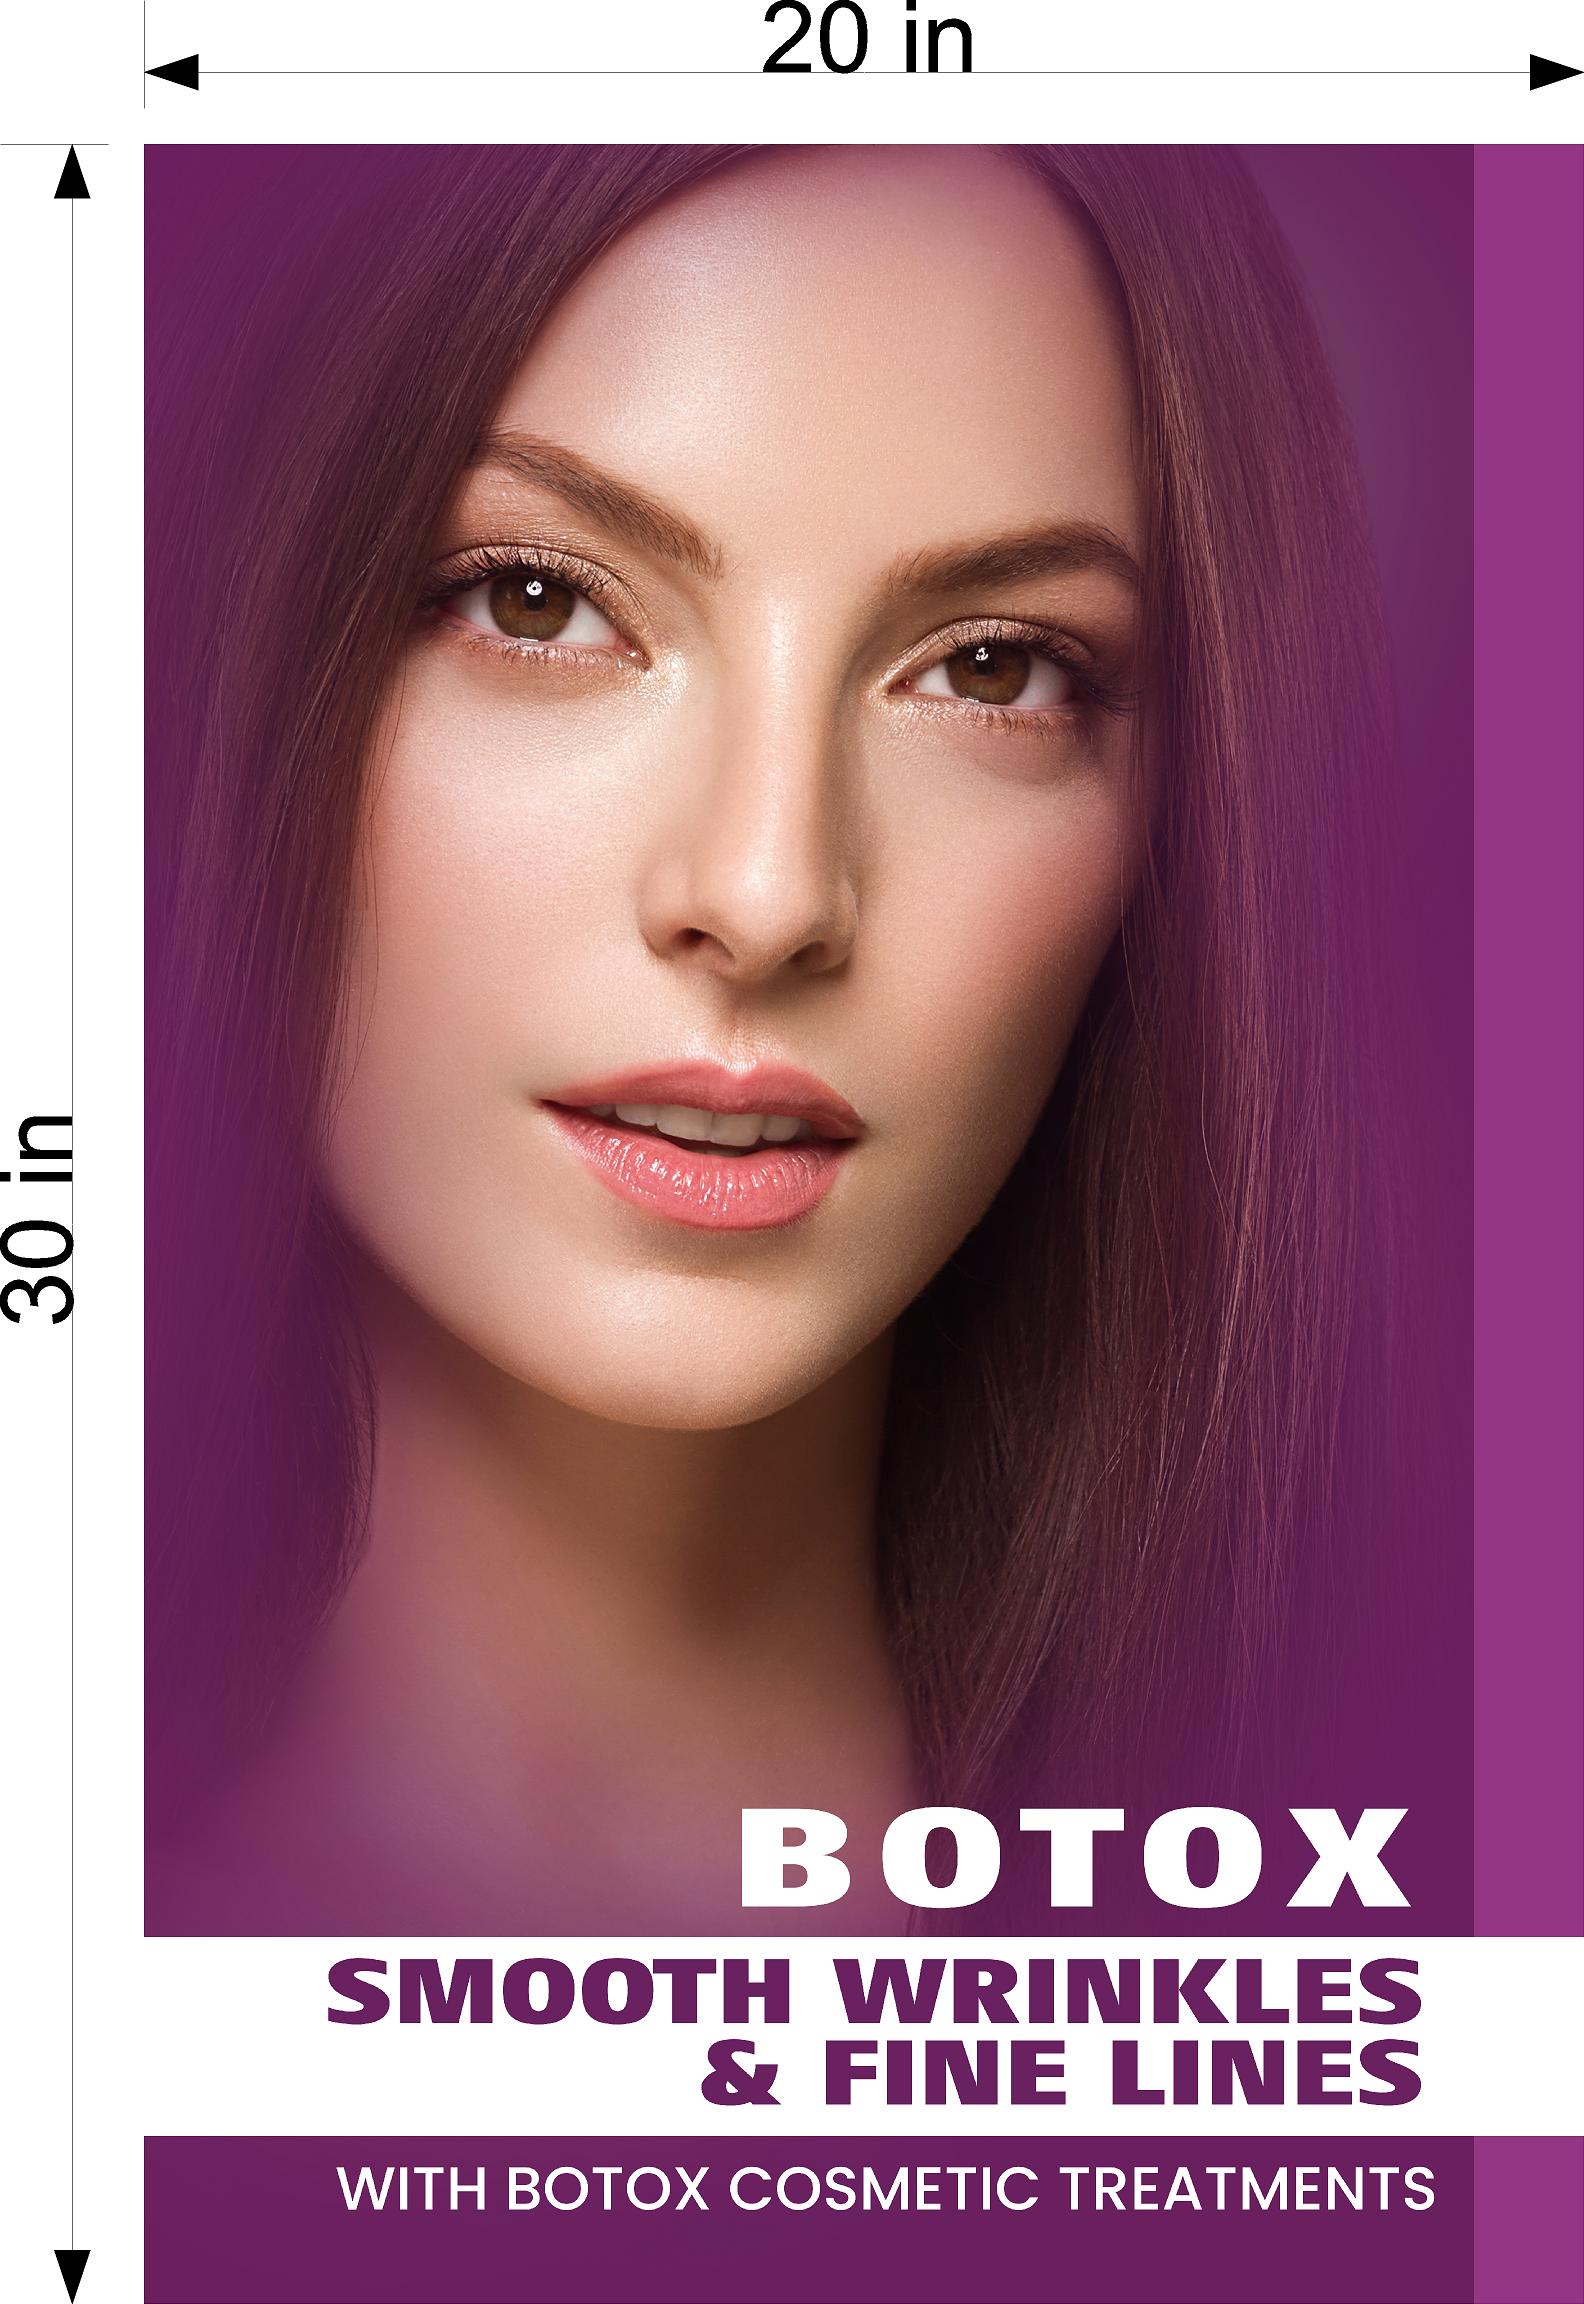 Botox 13 Photo-Realistic Paper Poster Premium Interior Inside Sign Advertising Marketing Wall Window Non-Laminated Vertical